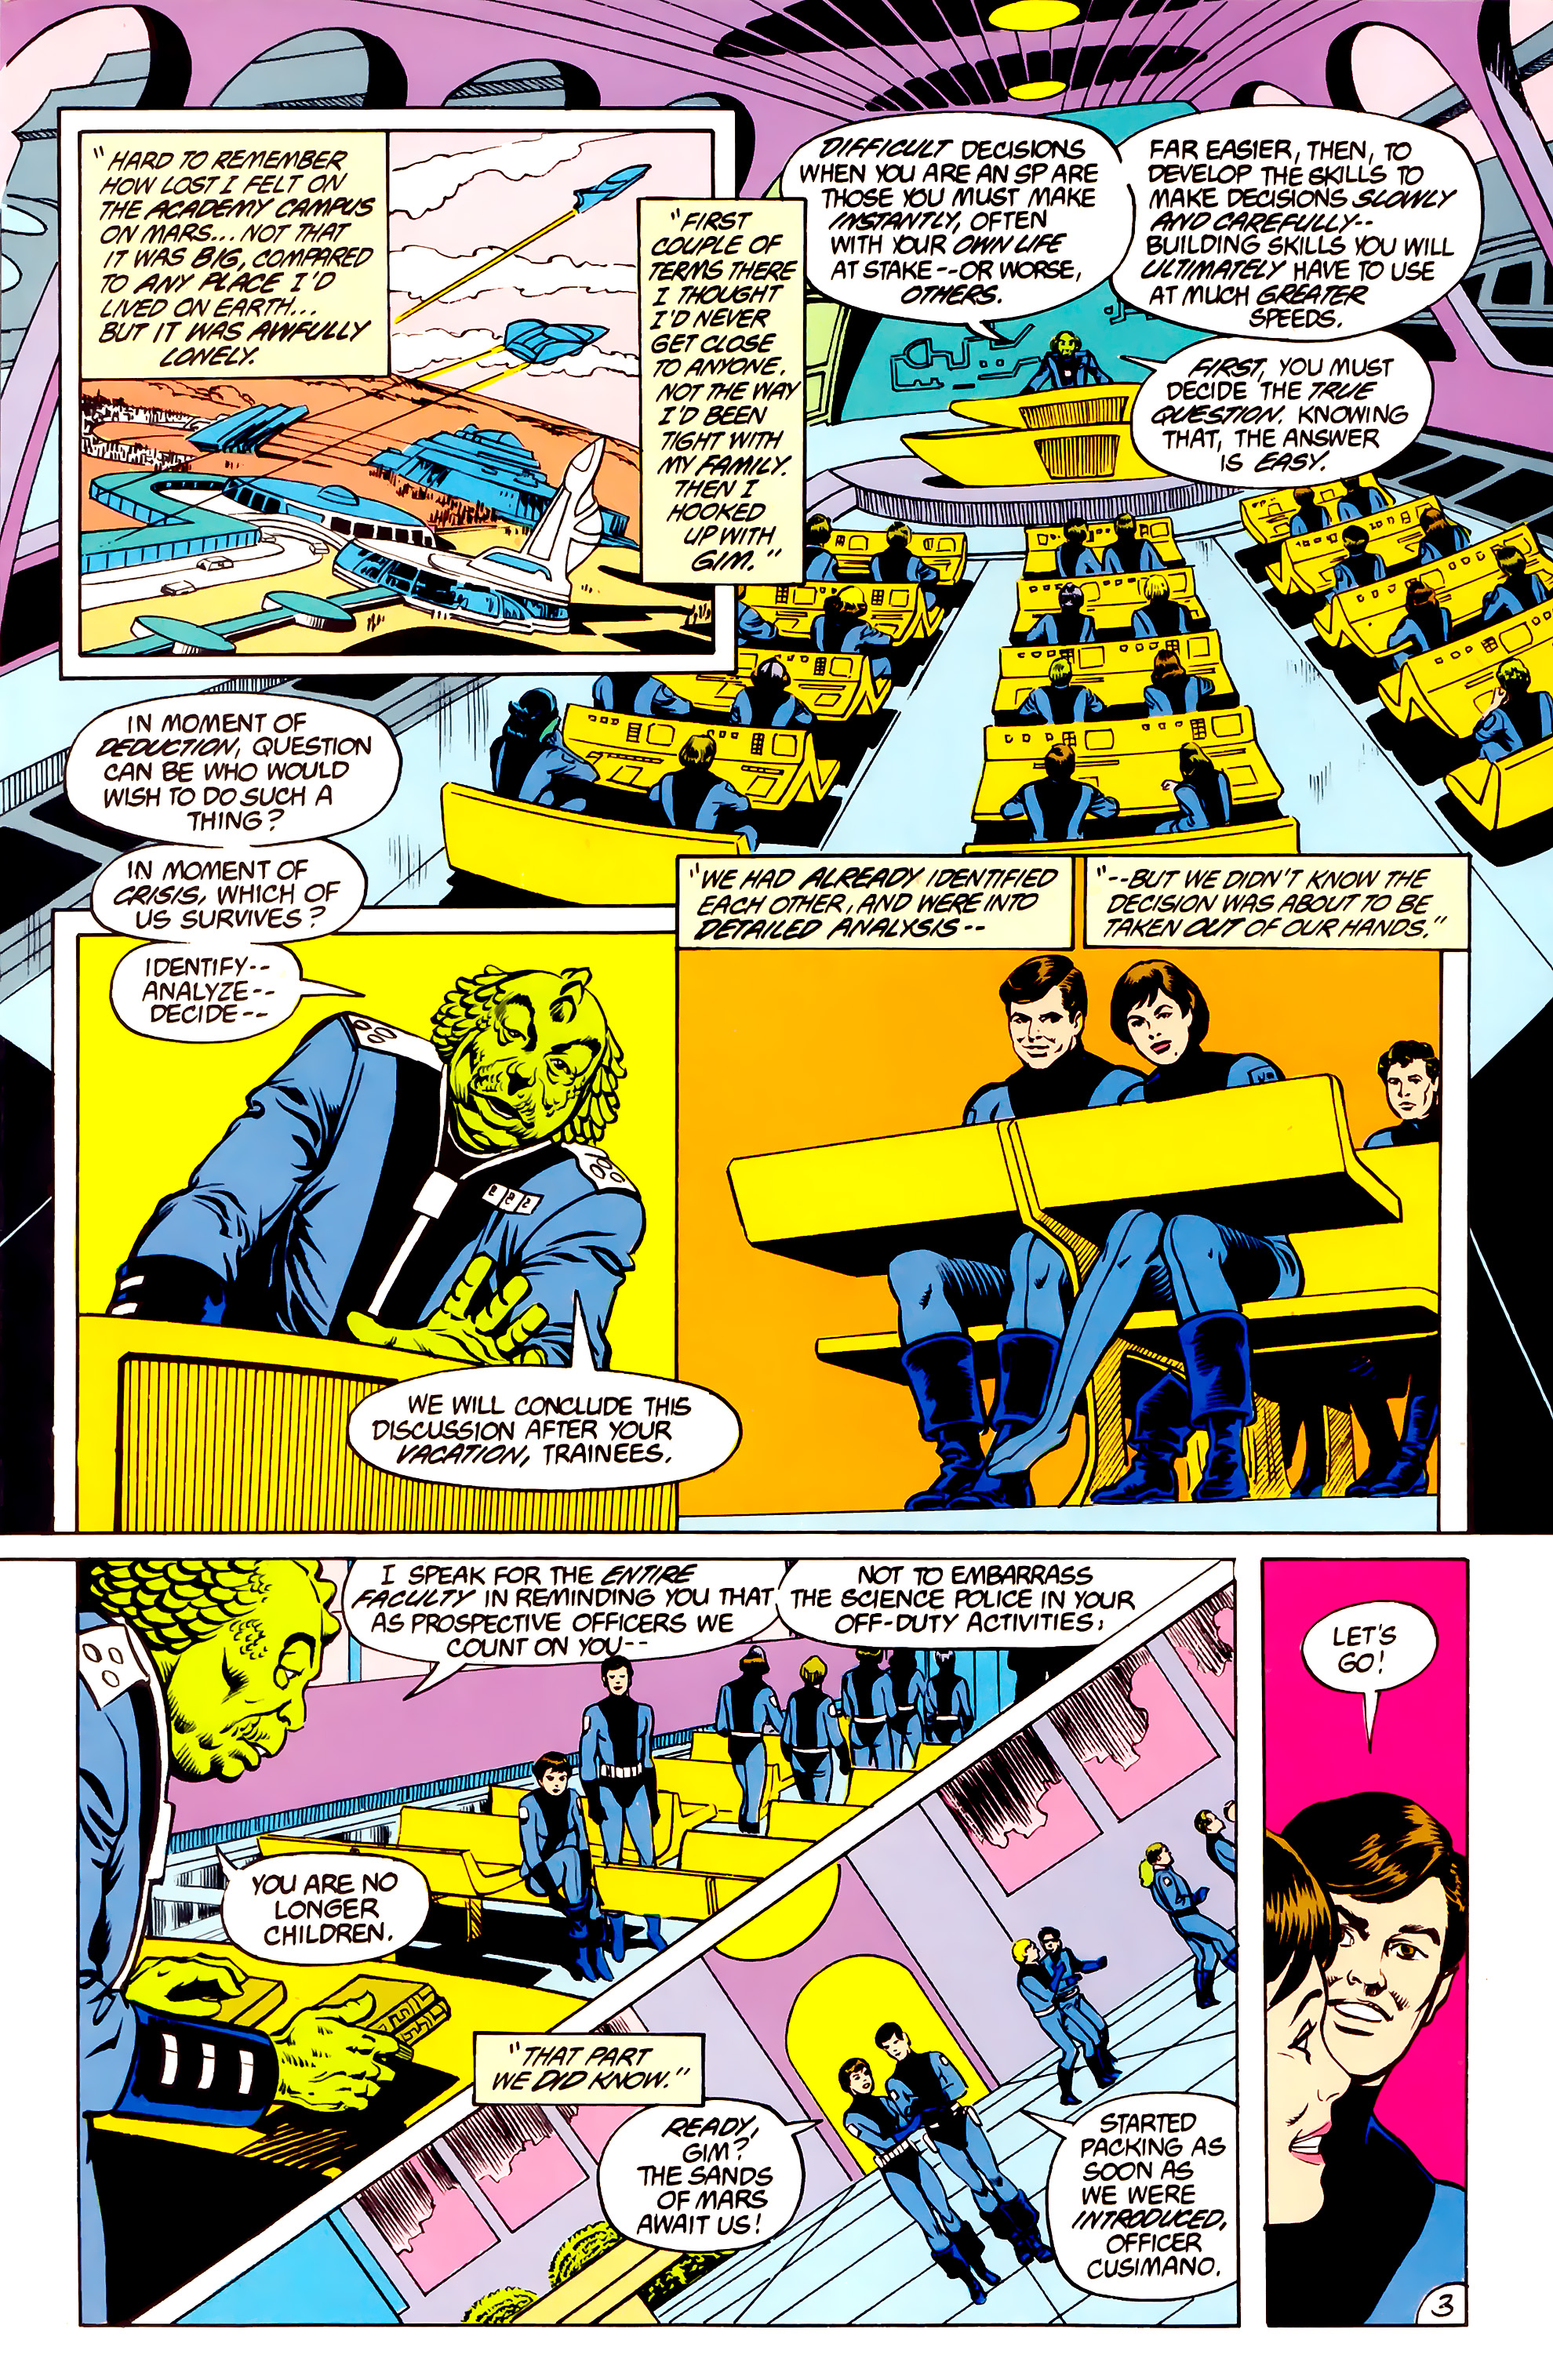 Legion of Super-Heroes (1984) 39 Page 3